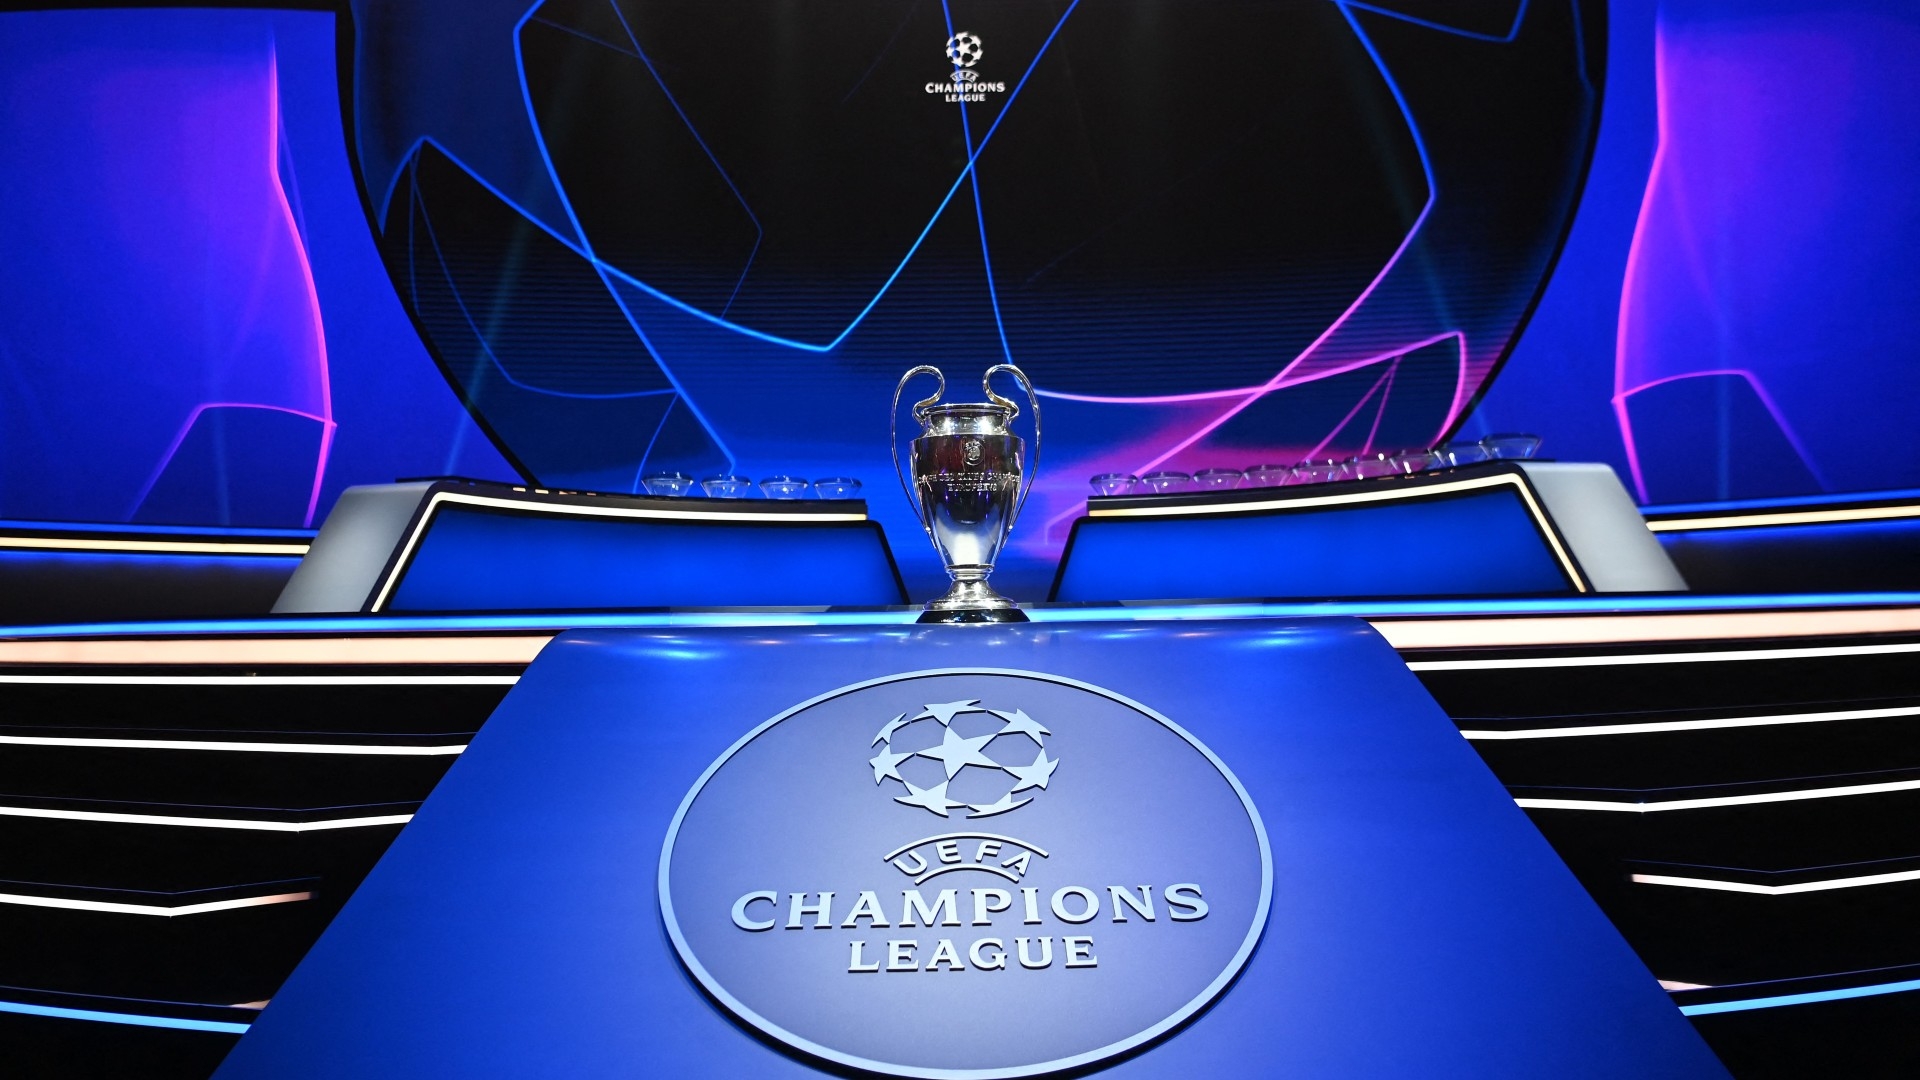 Champions league round of 16 draw 2022